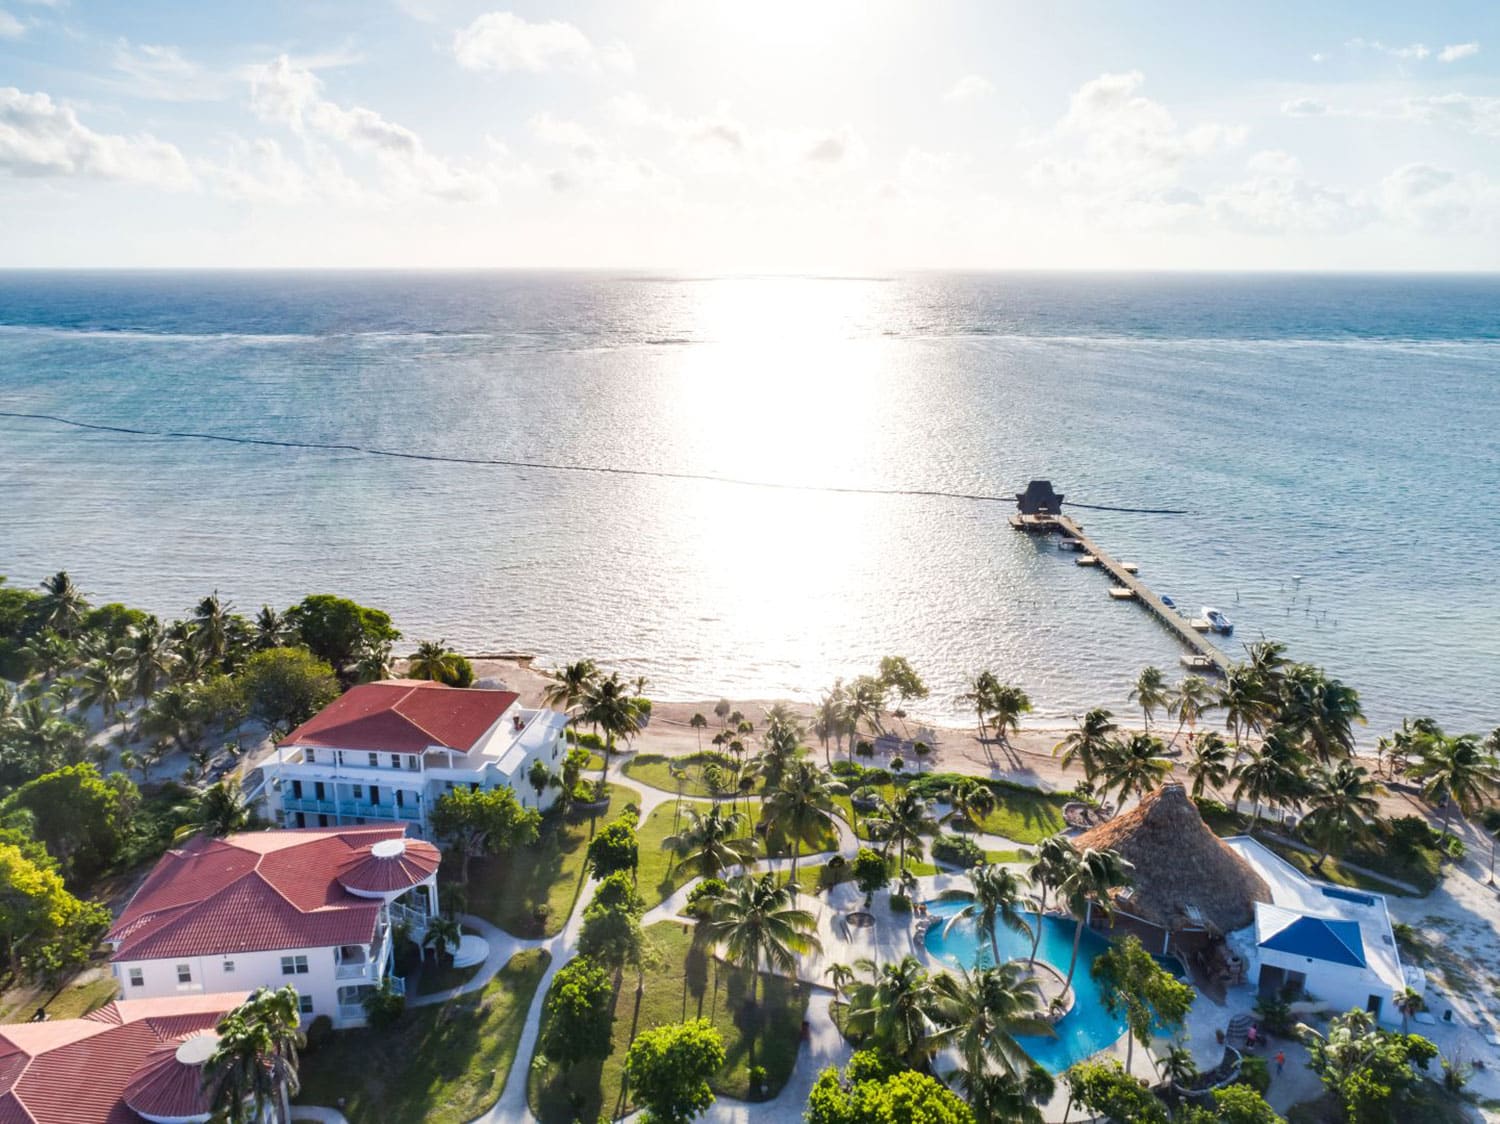 An aerial view of the brand new Margaritaville Beach Resort Ambergris Caye in Belize. Credit: Margaritaville Beach Resort Ambergris Caye